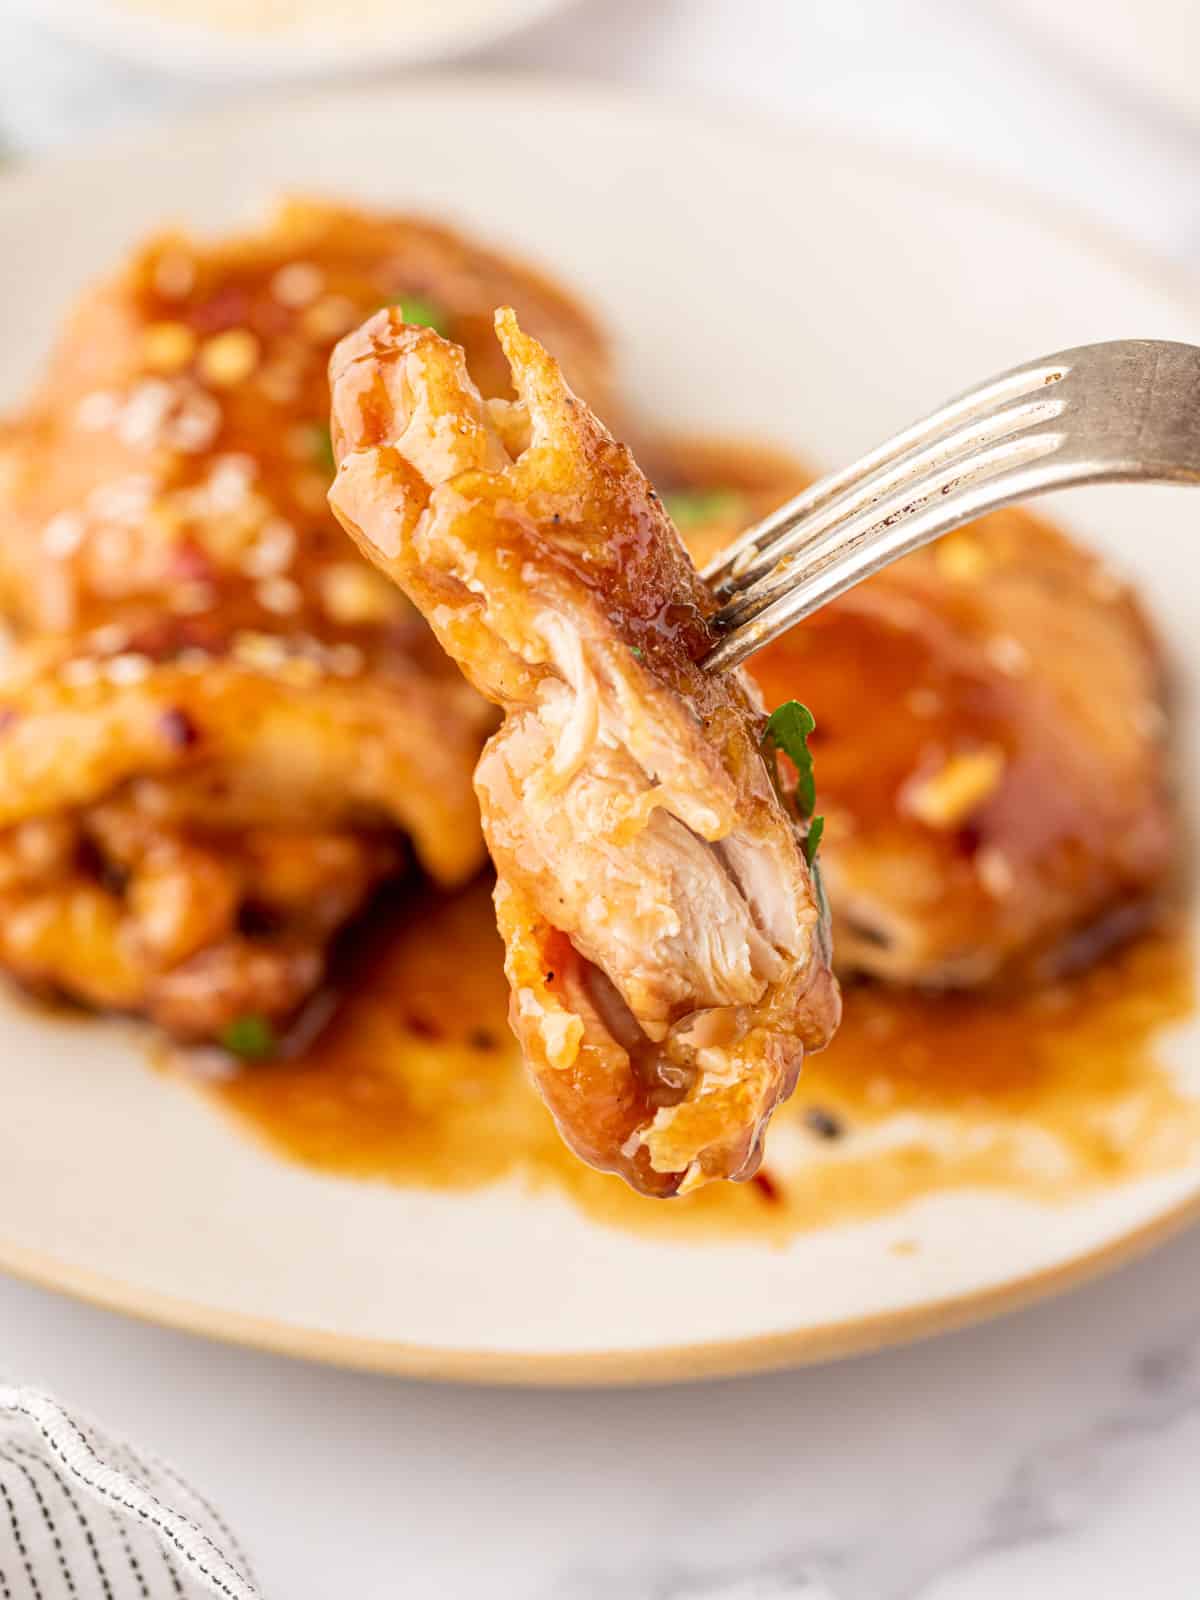 Juicy chicken thigh meat on a fork with a plate of honey garlic chicken in the background.